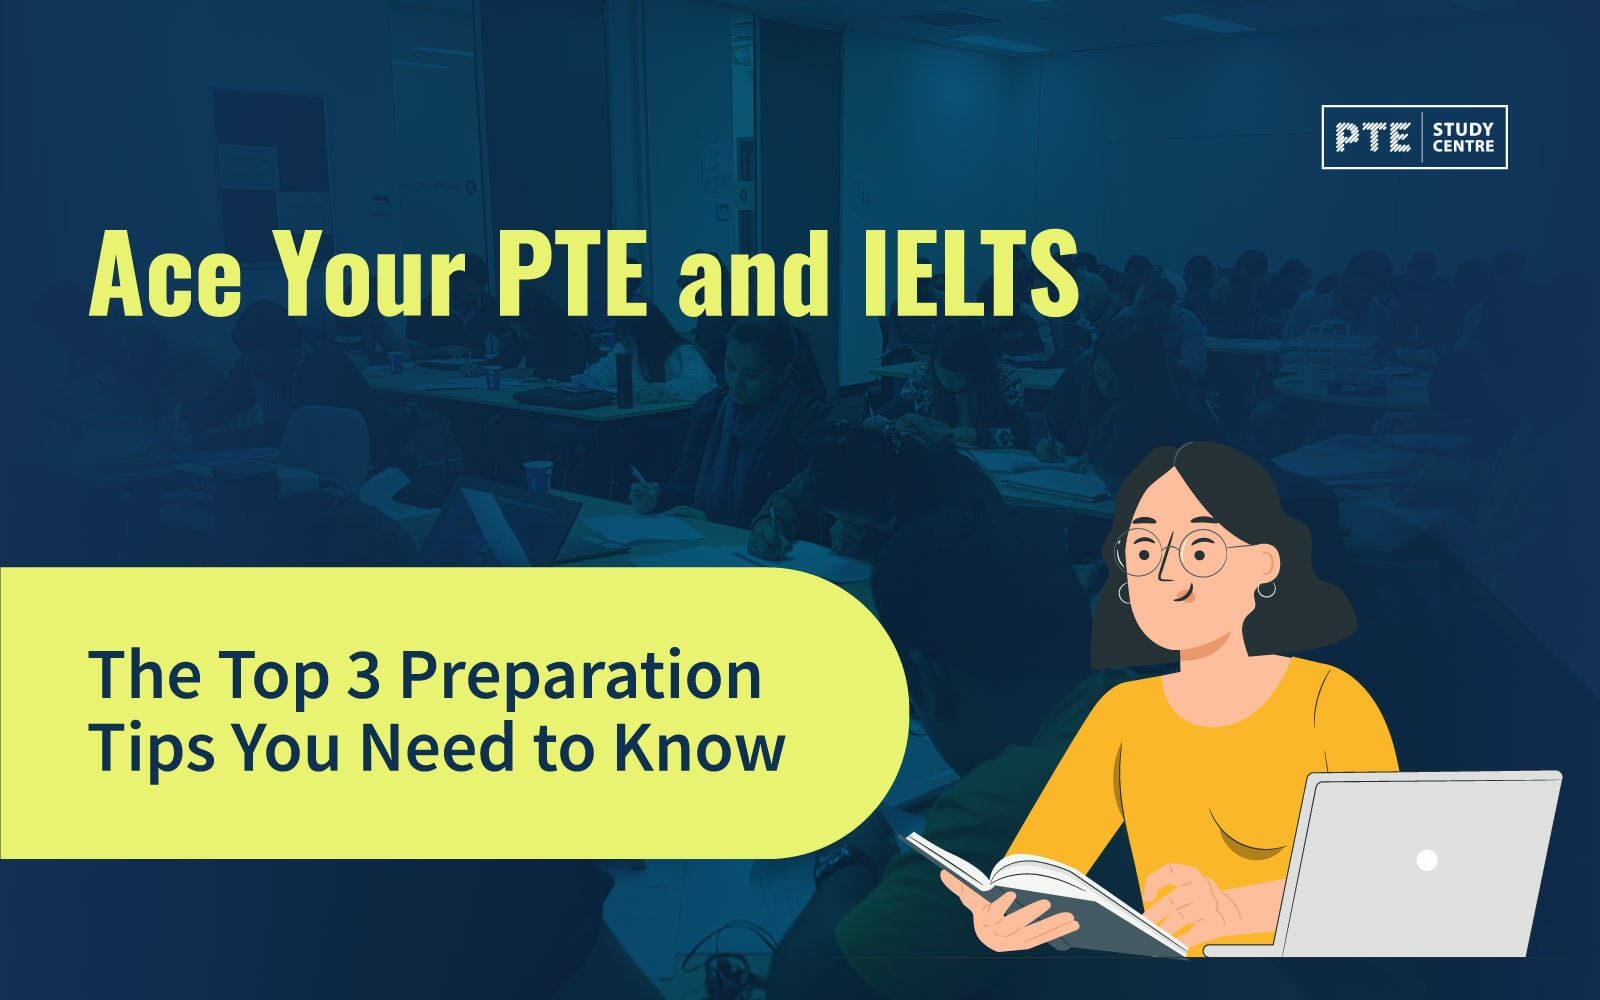 Ace Your PTE and IELTS: The Top 3 Preparation Tips You Need to Know